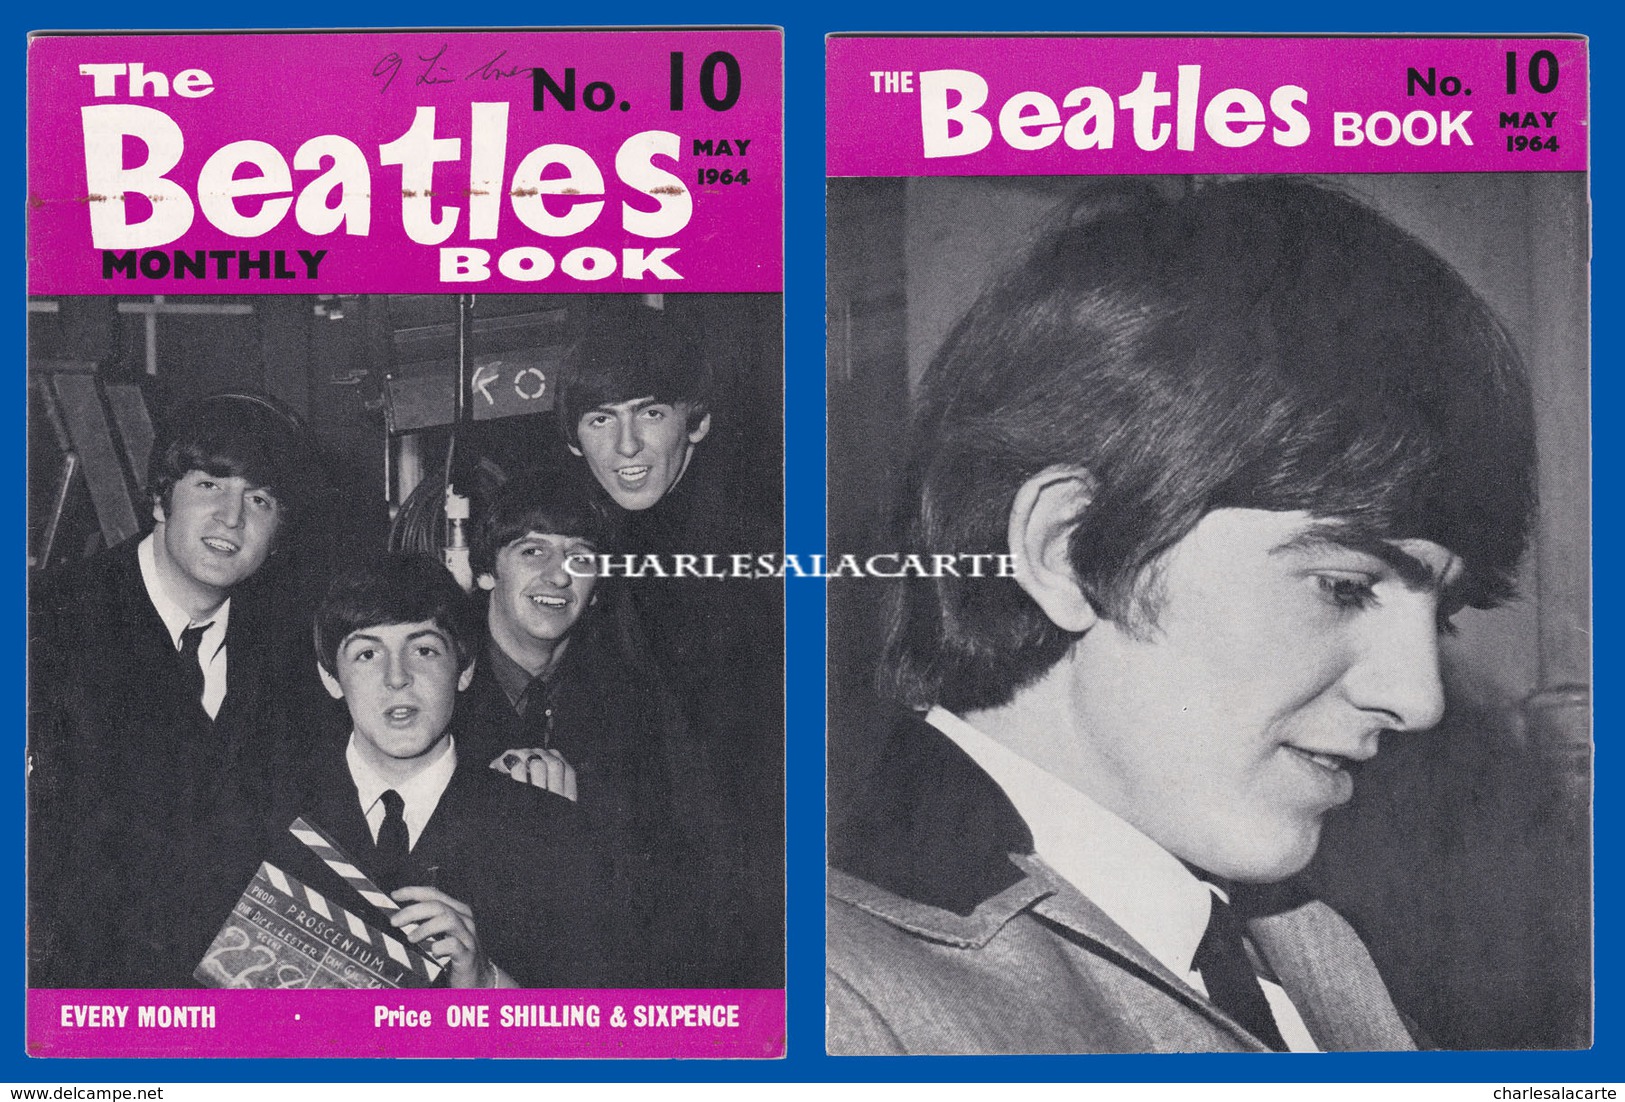 1964 MAY THE BEATLES MONTHLY BOOK No.10 AUTHENTIC SUBERB CONDITION SEE THE SCAN - Divertissement